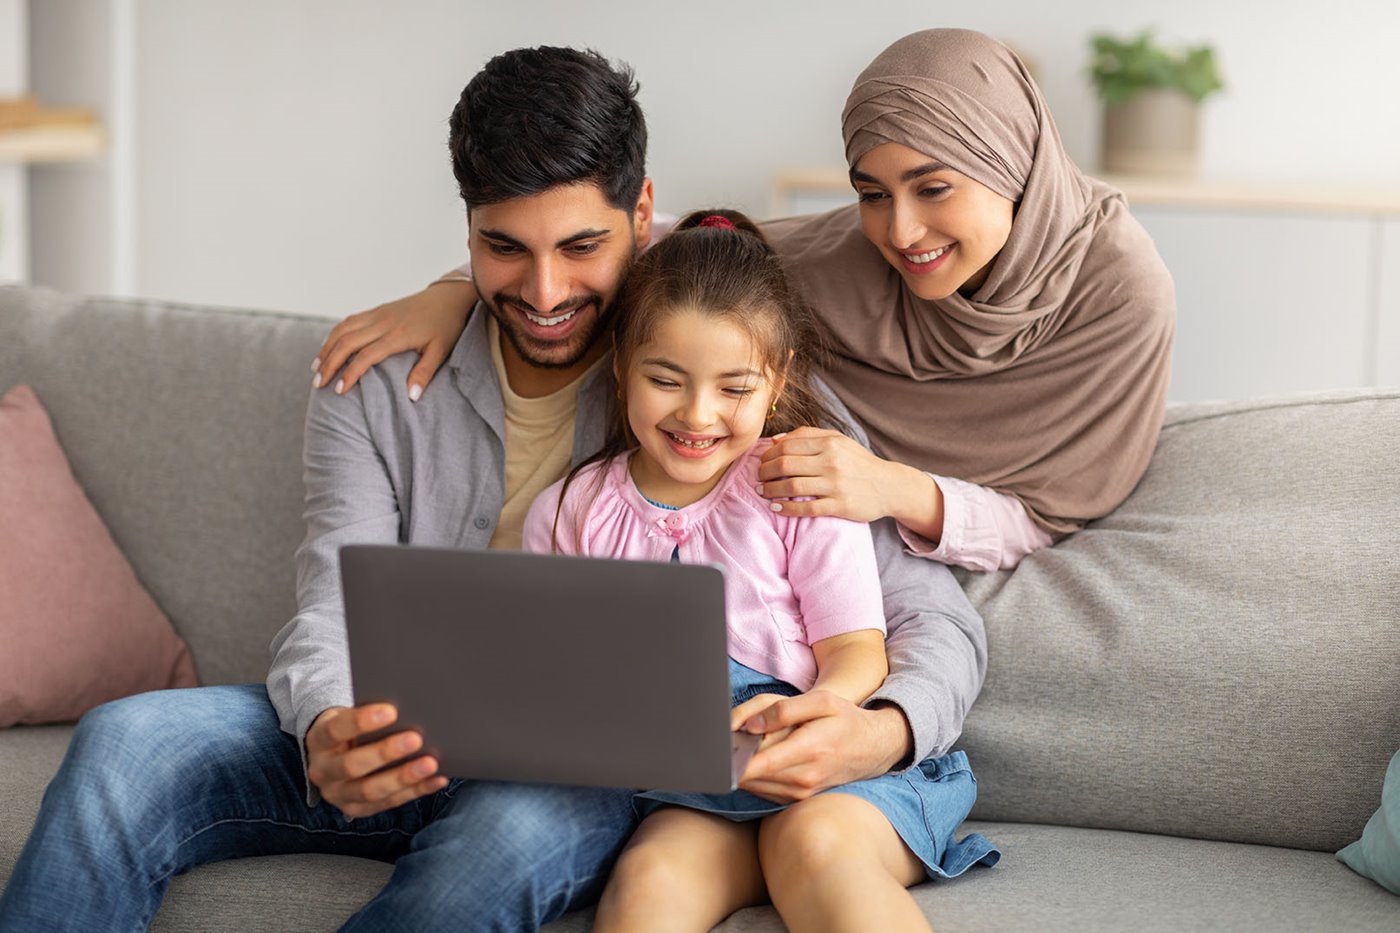 A mom leans over her husband and son's shoulders while they smile at their laptop